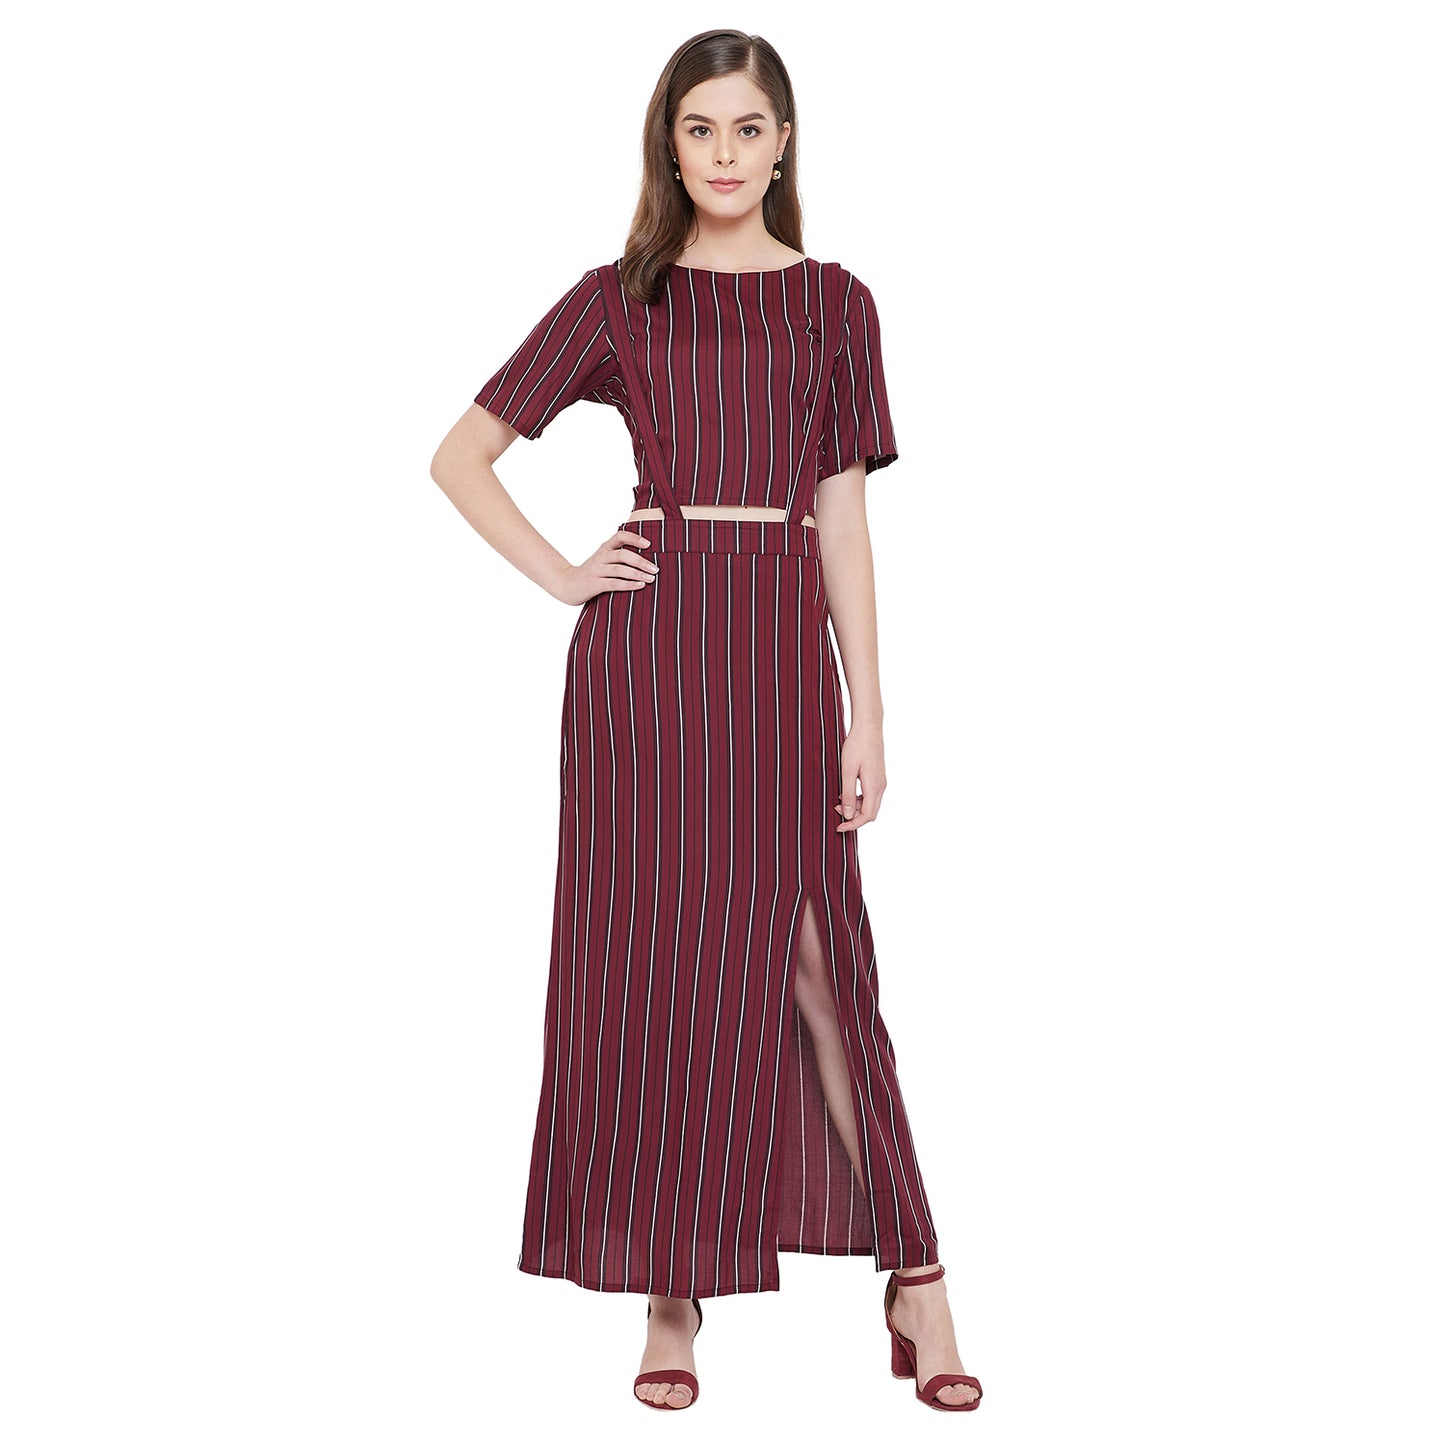 Women's Fit and Flare Midi Length Skirt and top